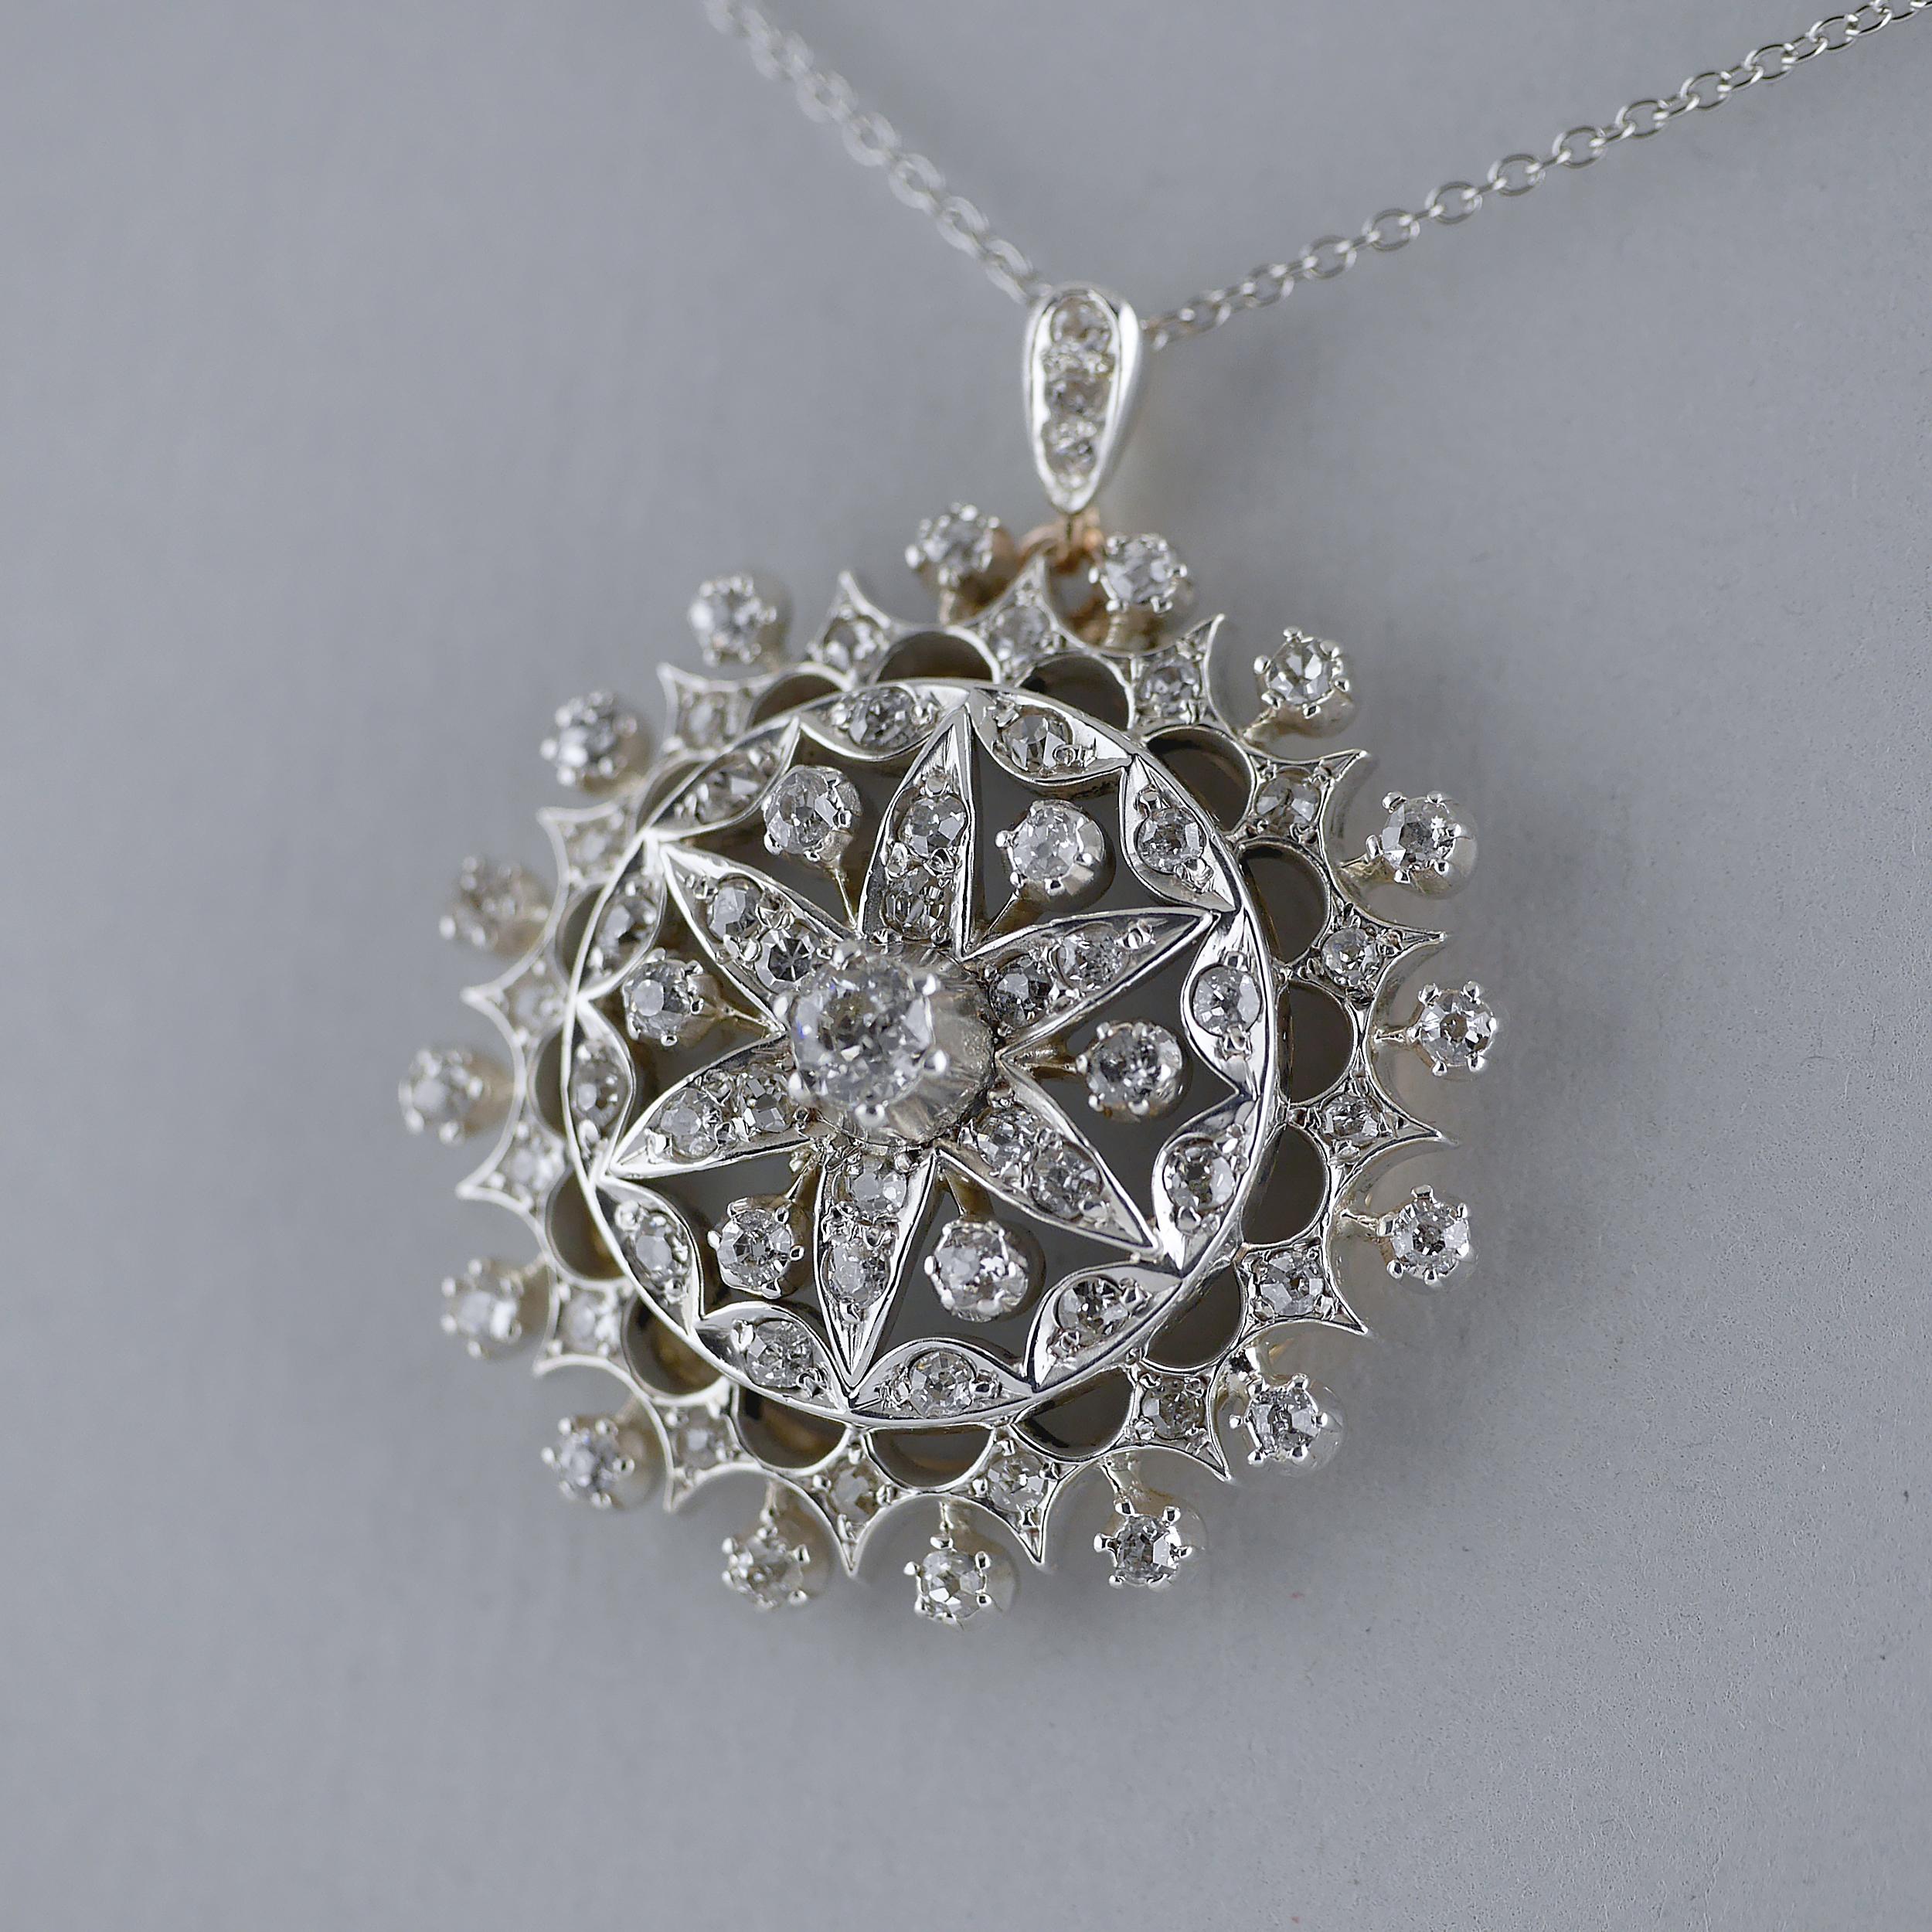 18ct gold and silver set late Victorian, Diamond round shaped Pendant circa 1880 

Floral and starburst motif design with round Victorian cut (old mine) diamonds, approx 5ct (Carats) in total. Mix of old mine and rose cut diamonds in an 18ct yellow